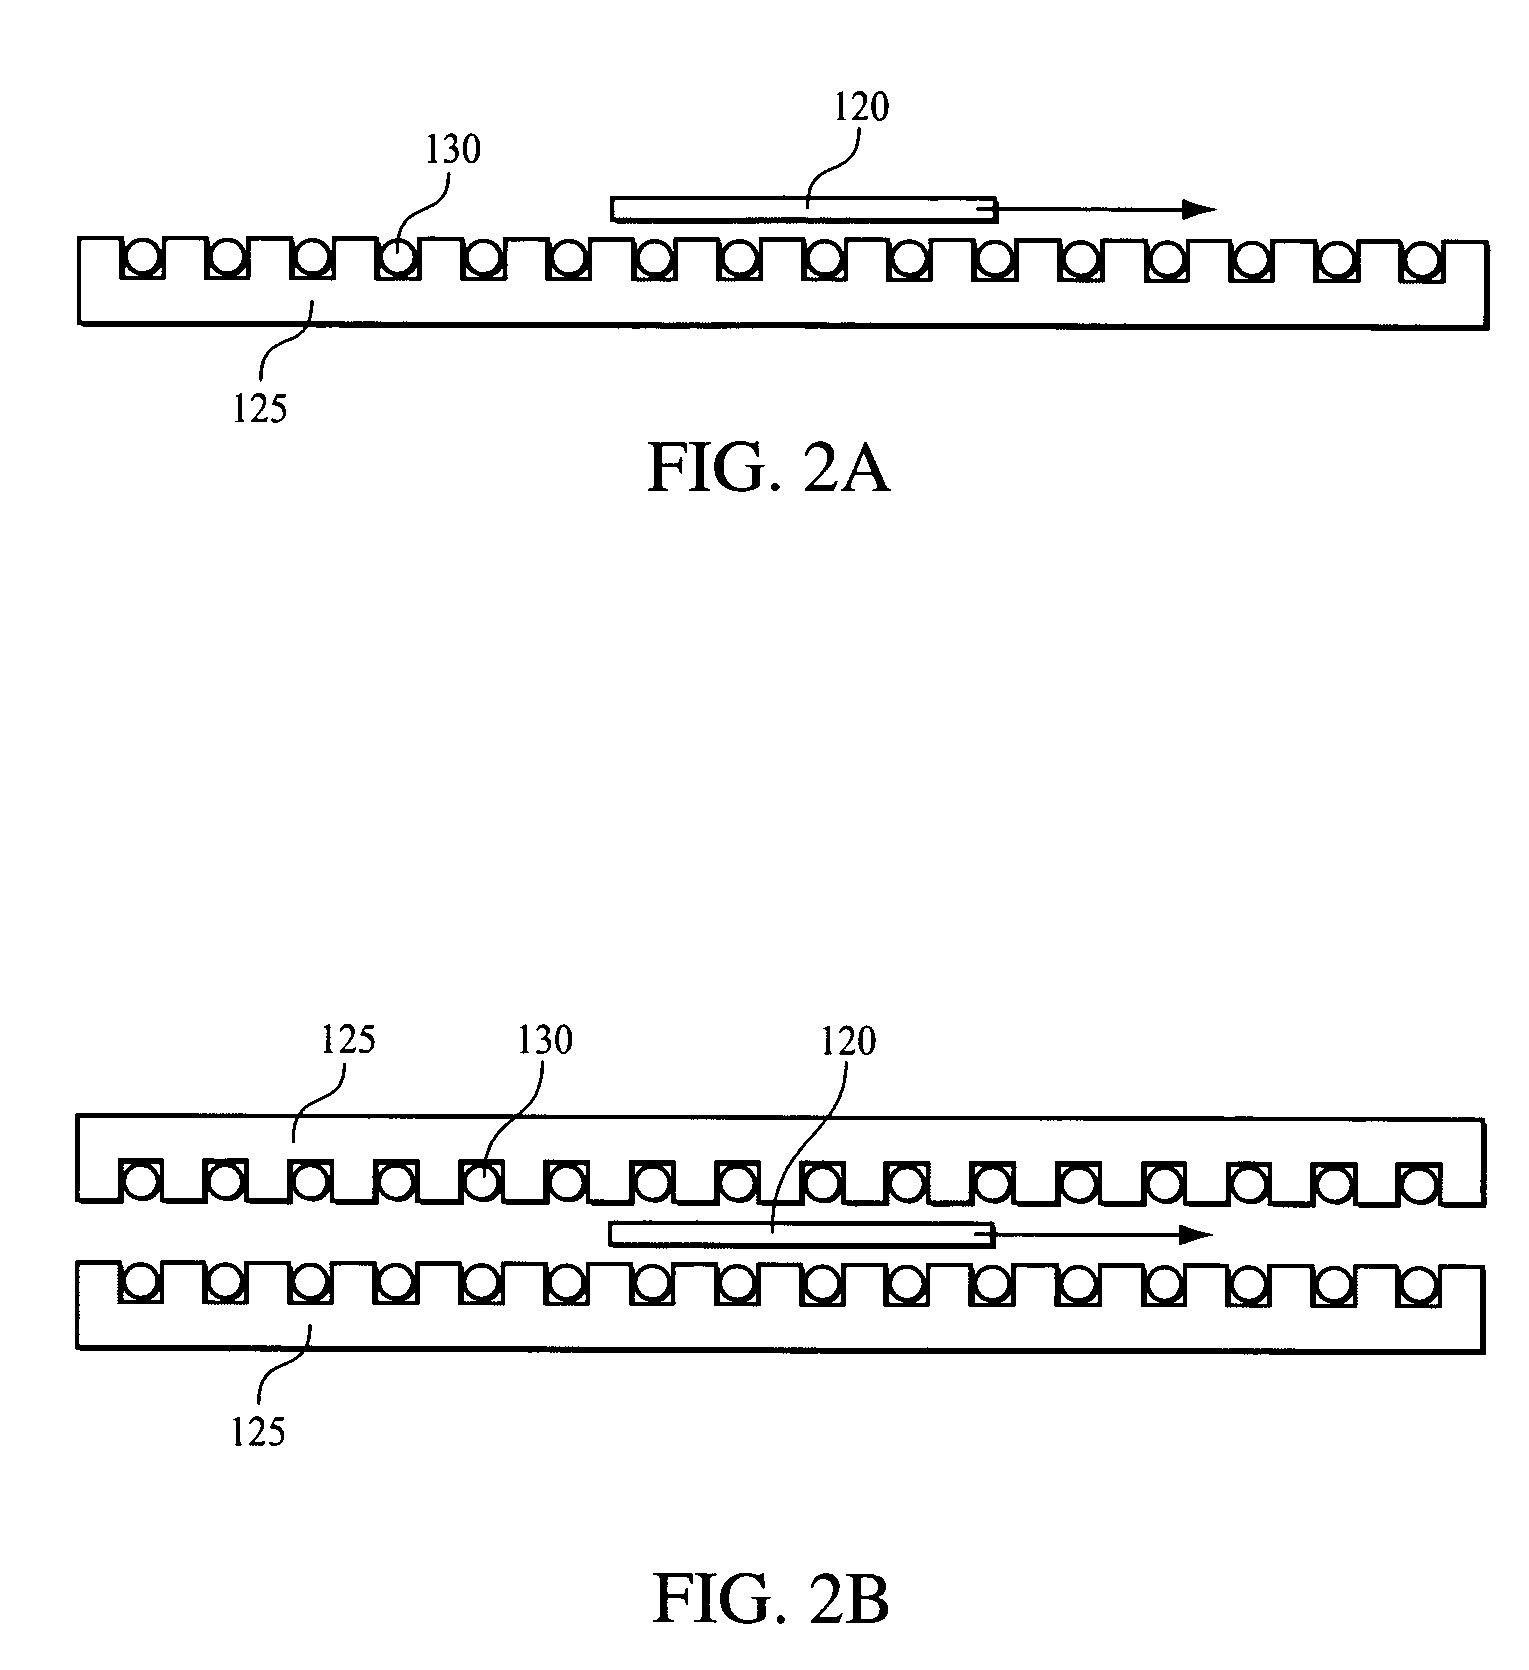 Linear position sensing system and coil switching methods for closed-loop control of large linear induction motor systems